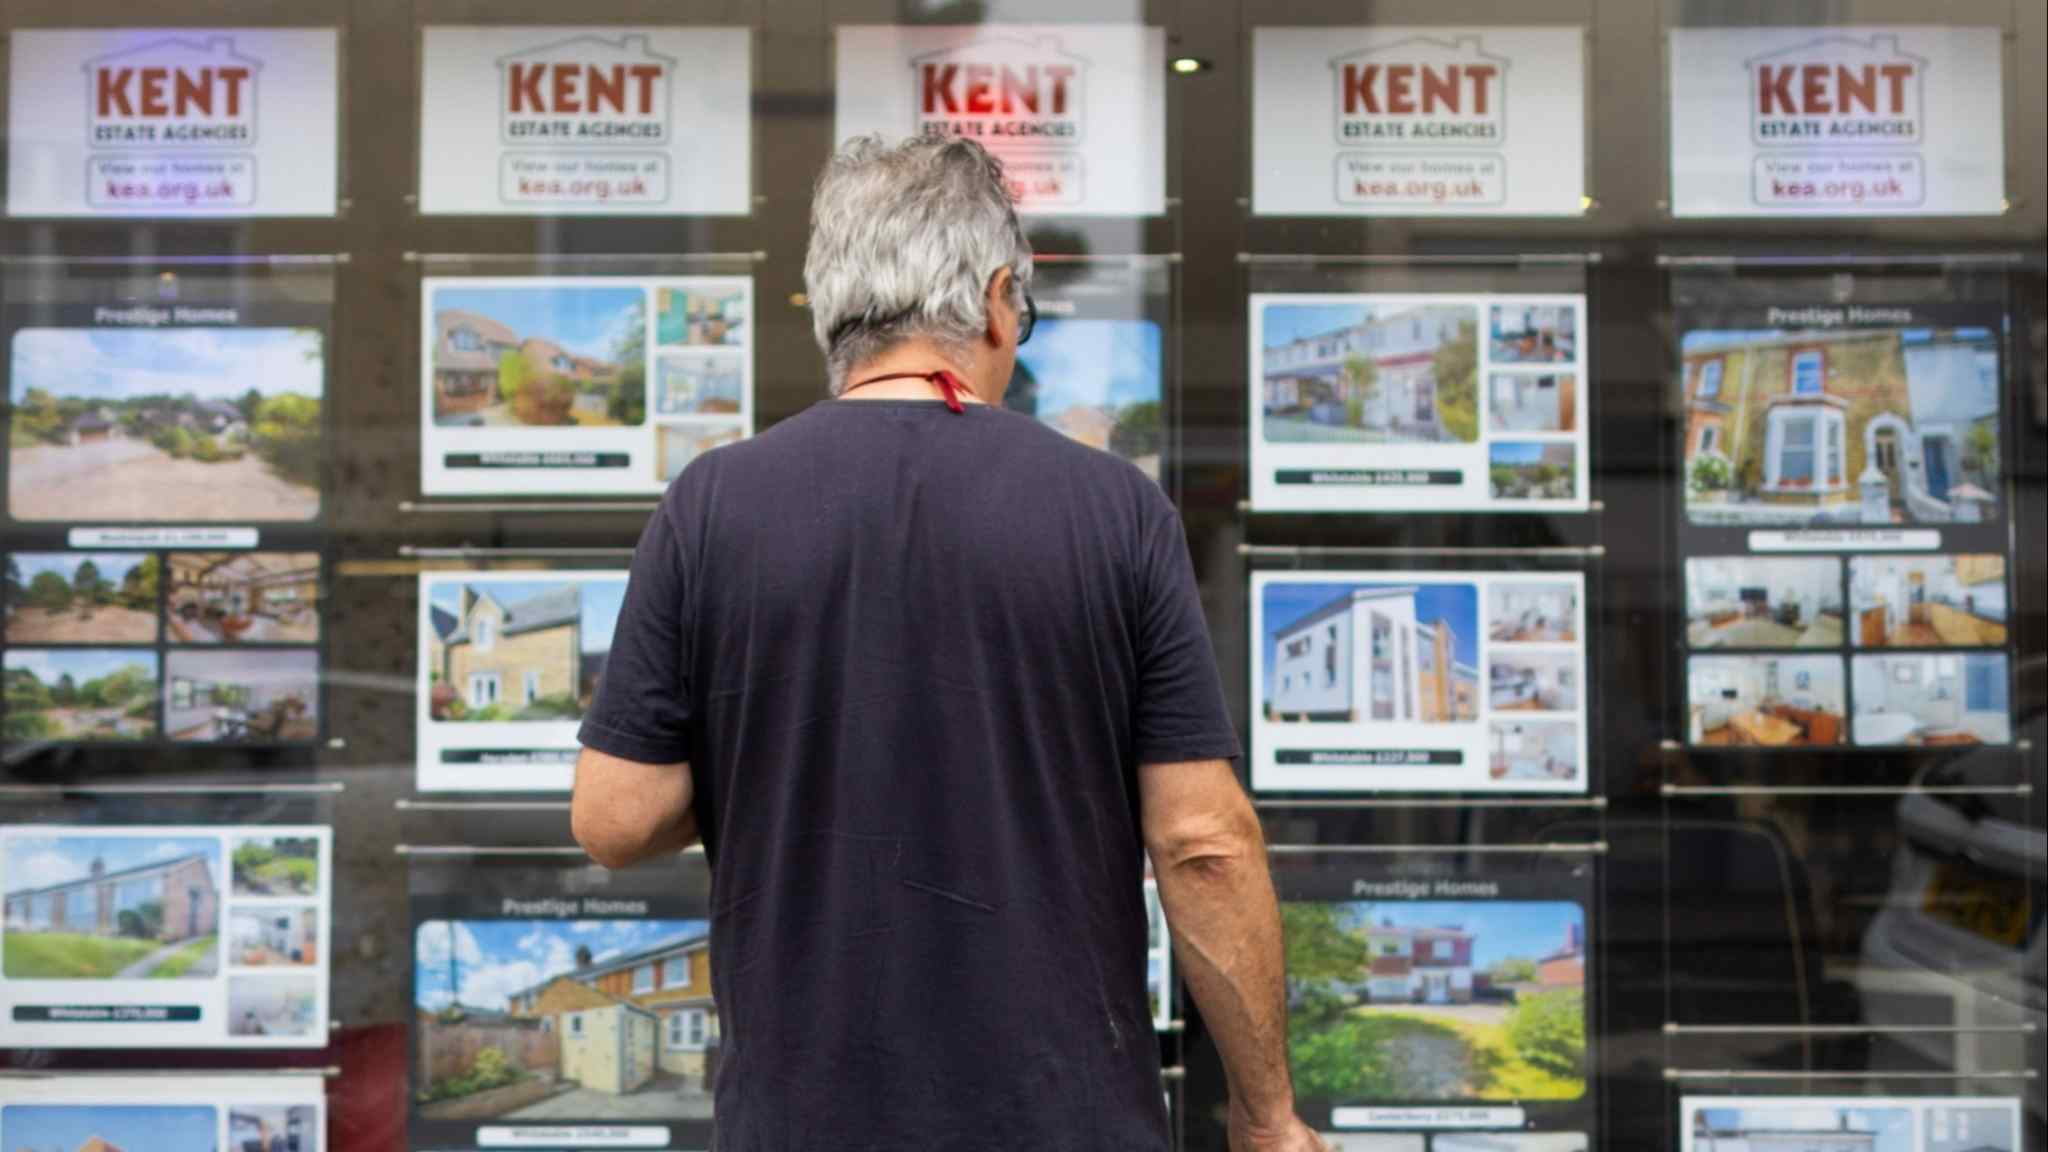 Live news: UK house prices fall for fifth consecutive month